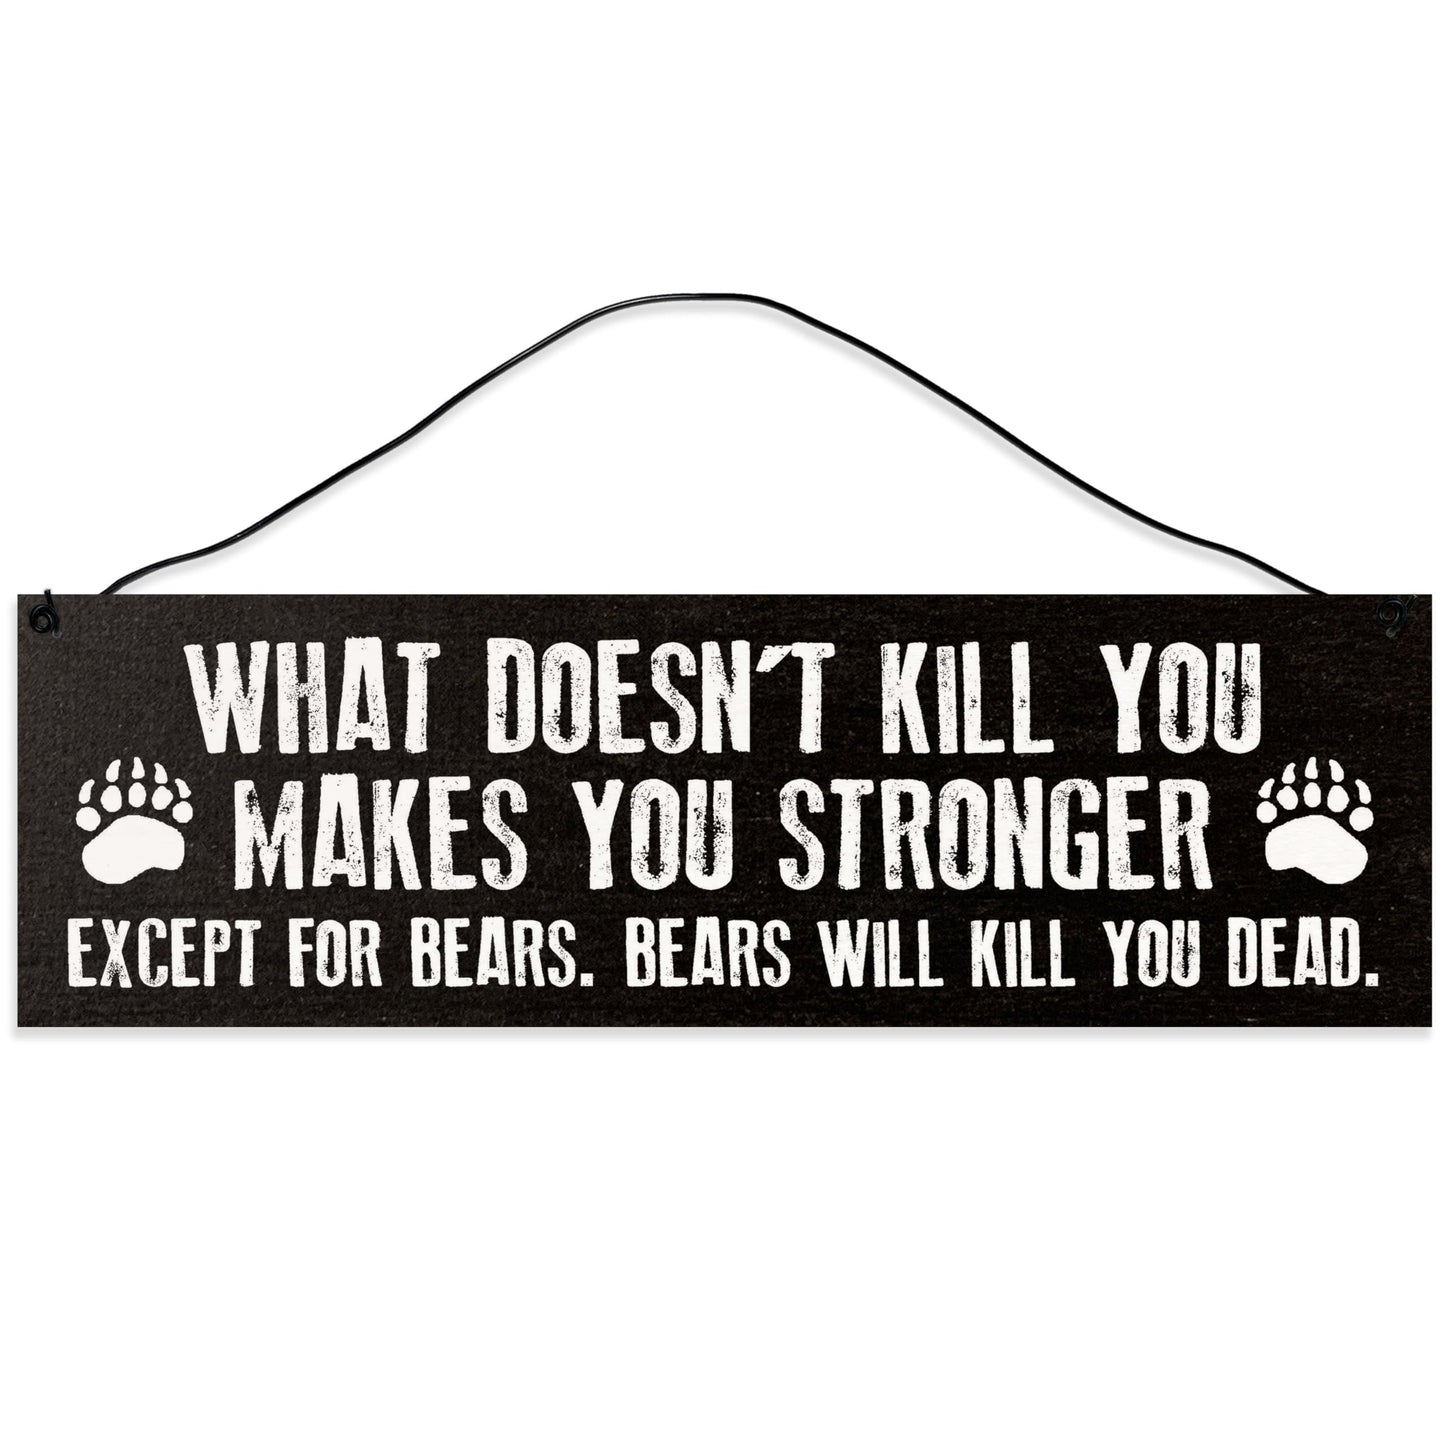 Bears Will Kill You Dead | Cabin Décor | Lodge Décor Handmade | Wood Sign | Wire Hanger/Stand | UV Printed | Solid Maple